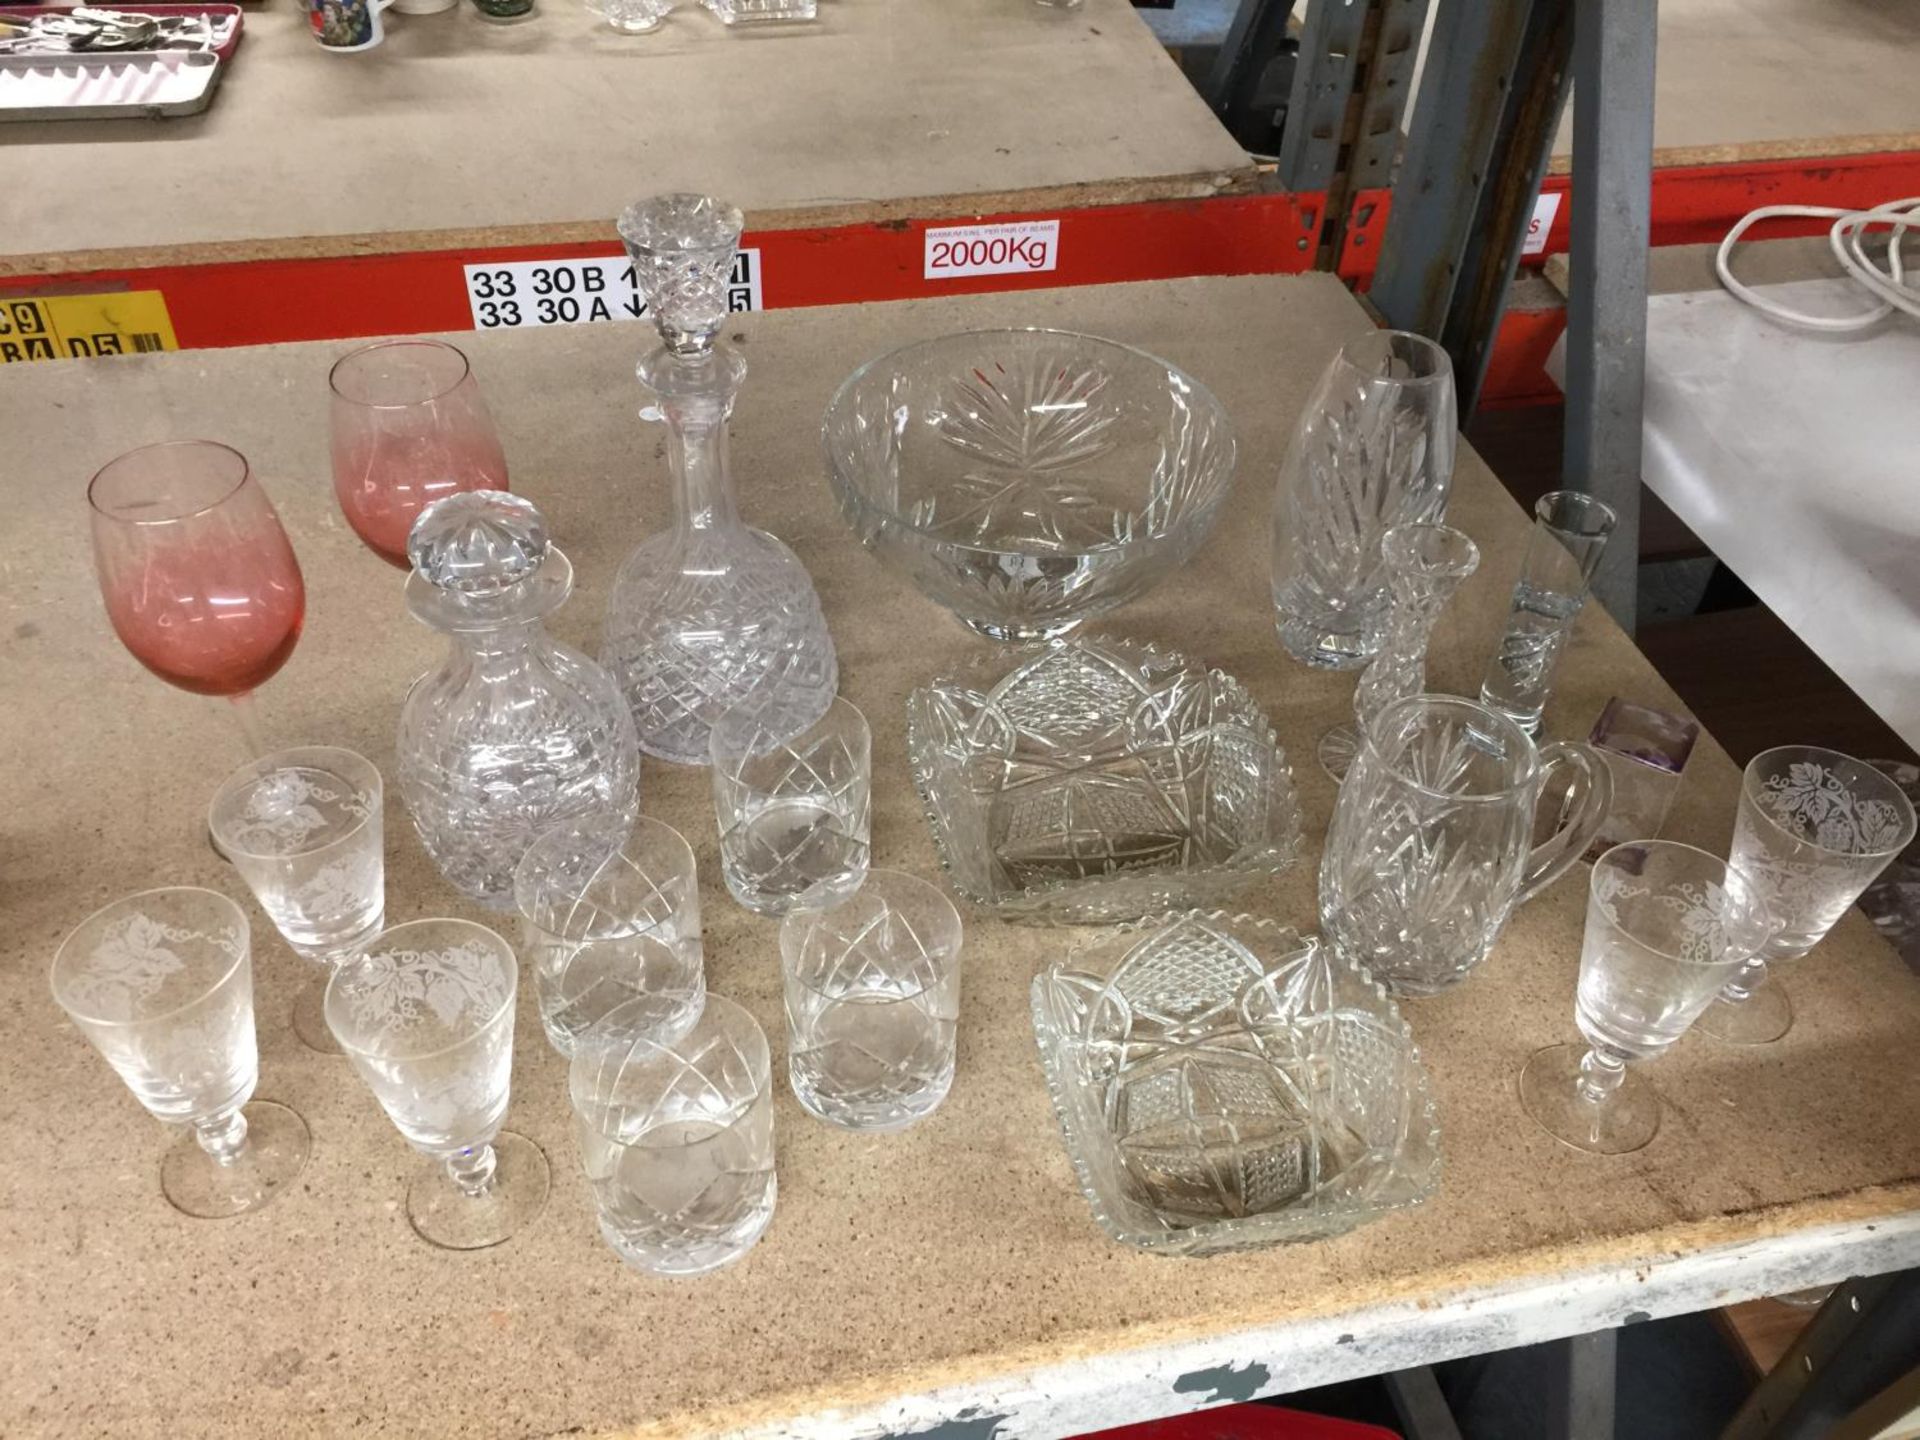 AN ASSORTMENT OF GLASSWARE TO INCLUDE DECANTERS, BOWLS, VASES, GLASSES, ETC